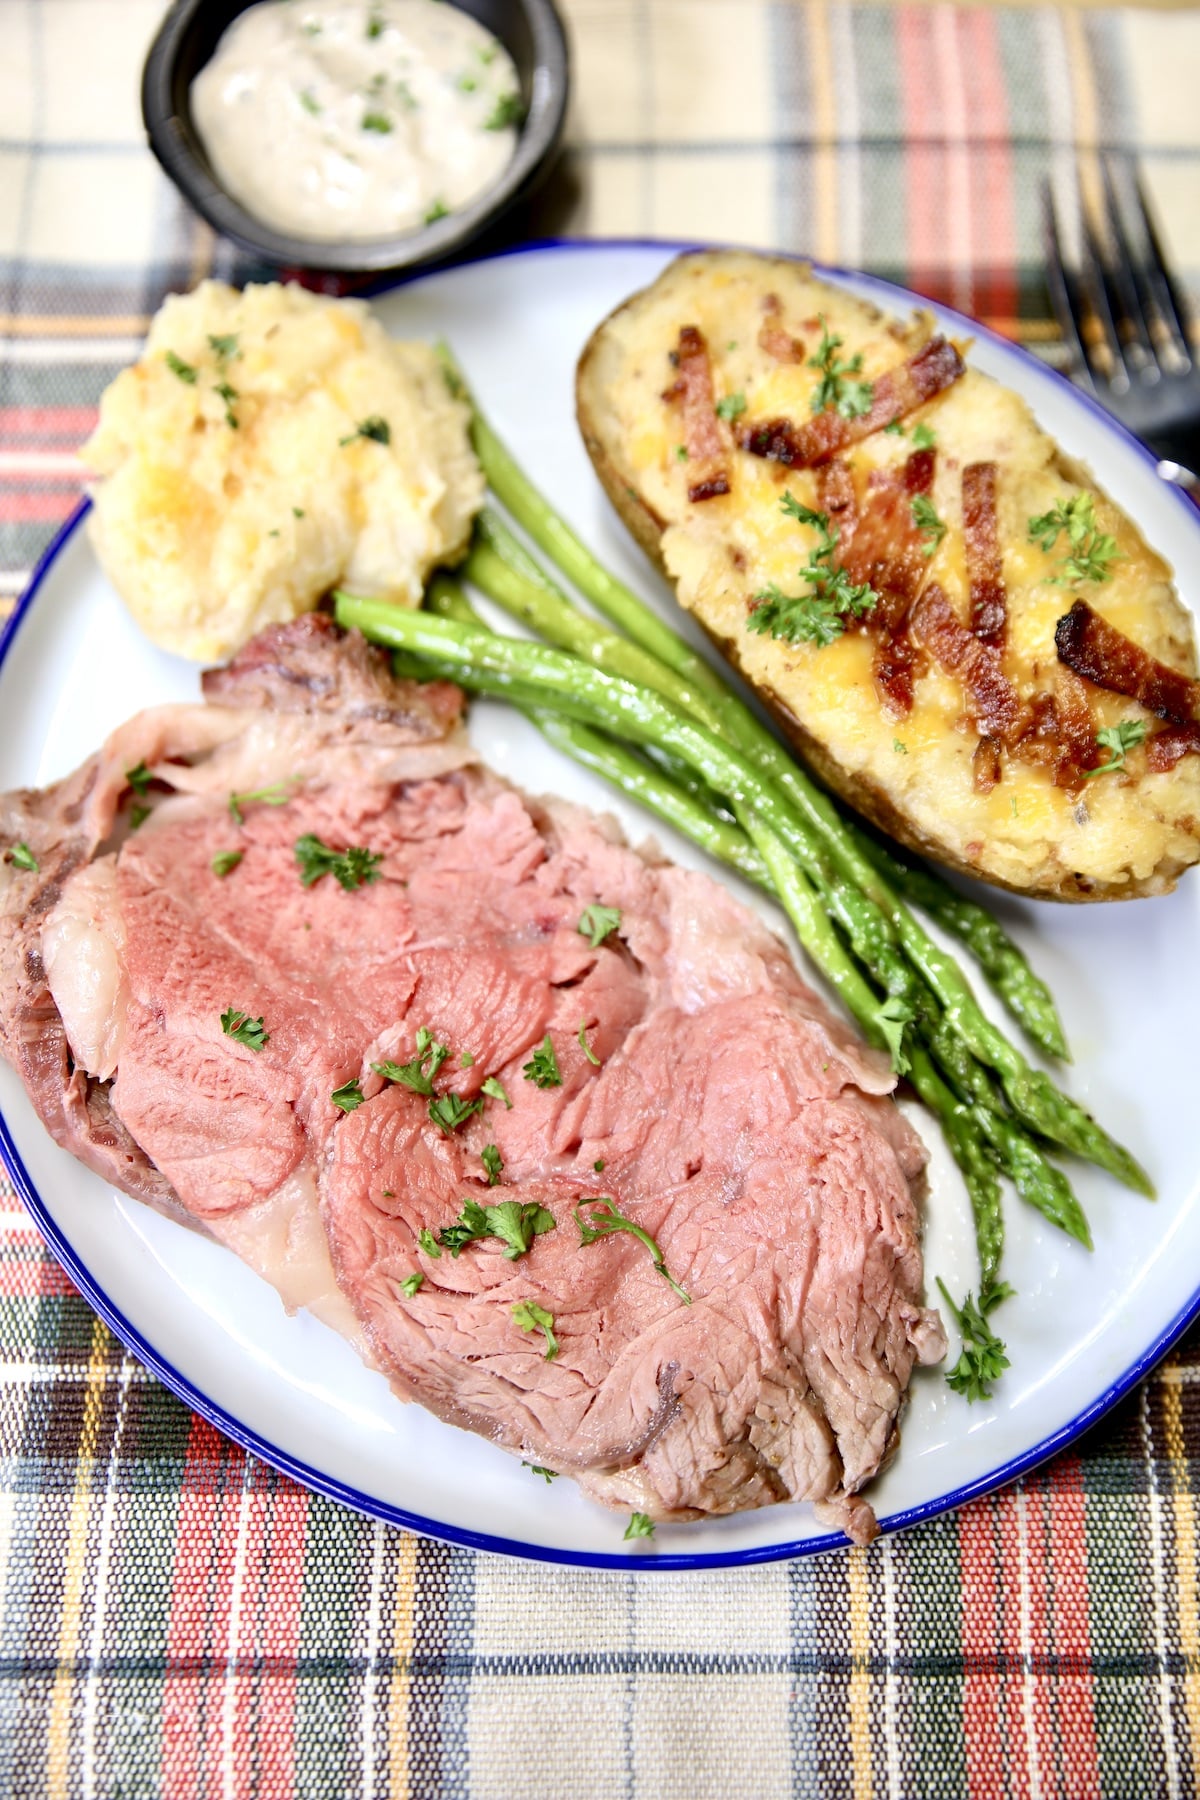 Plate of prime rib, twice baked potato, asparagus, biscuit.